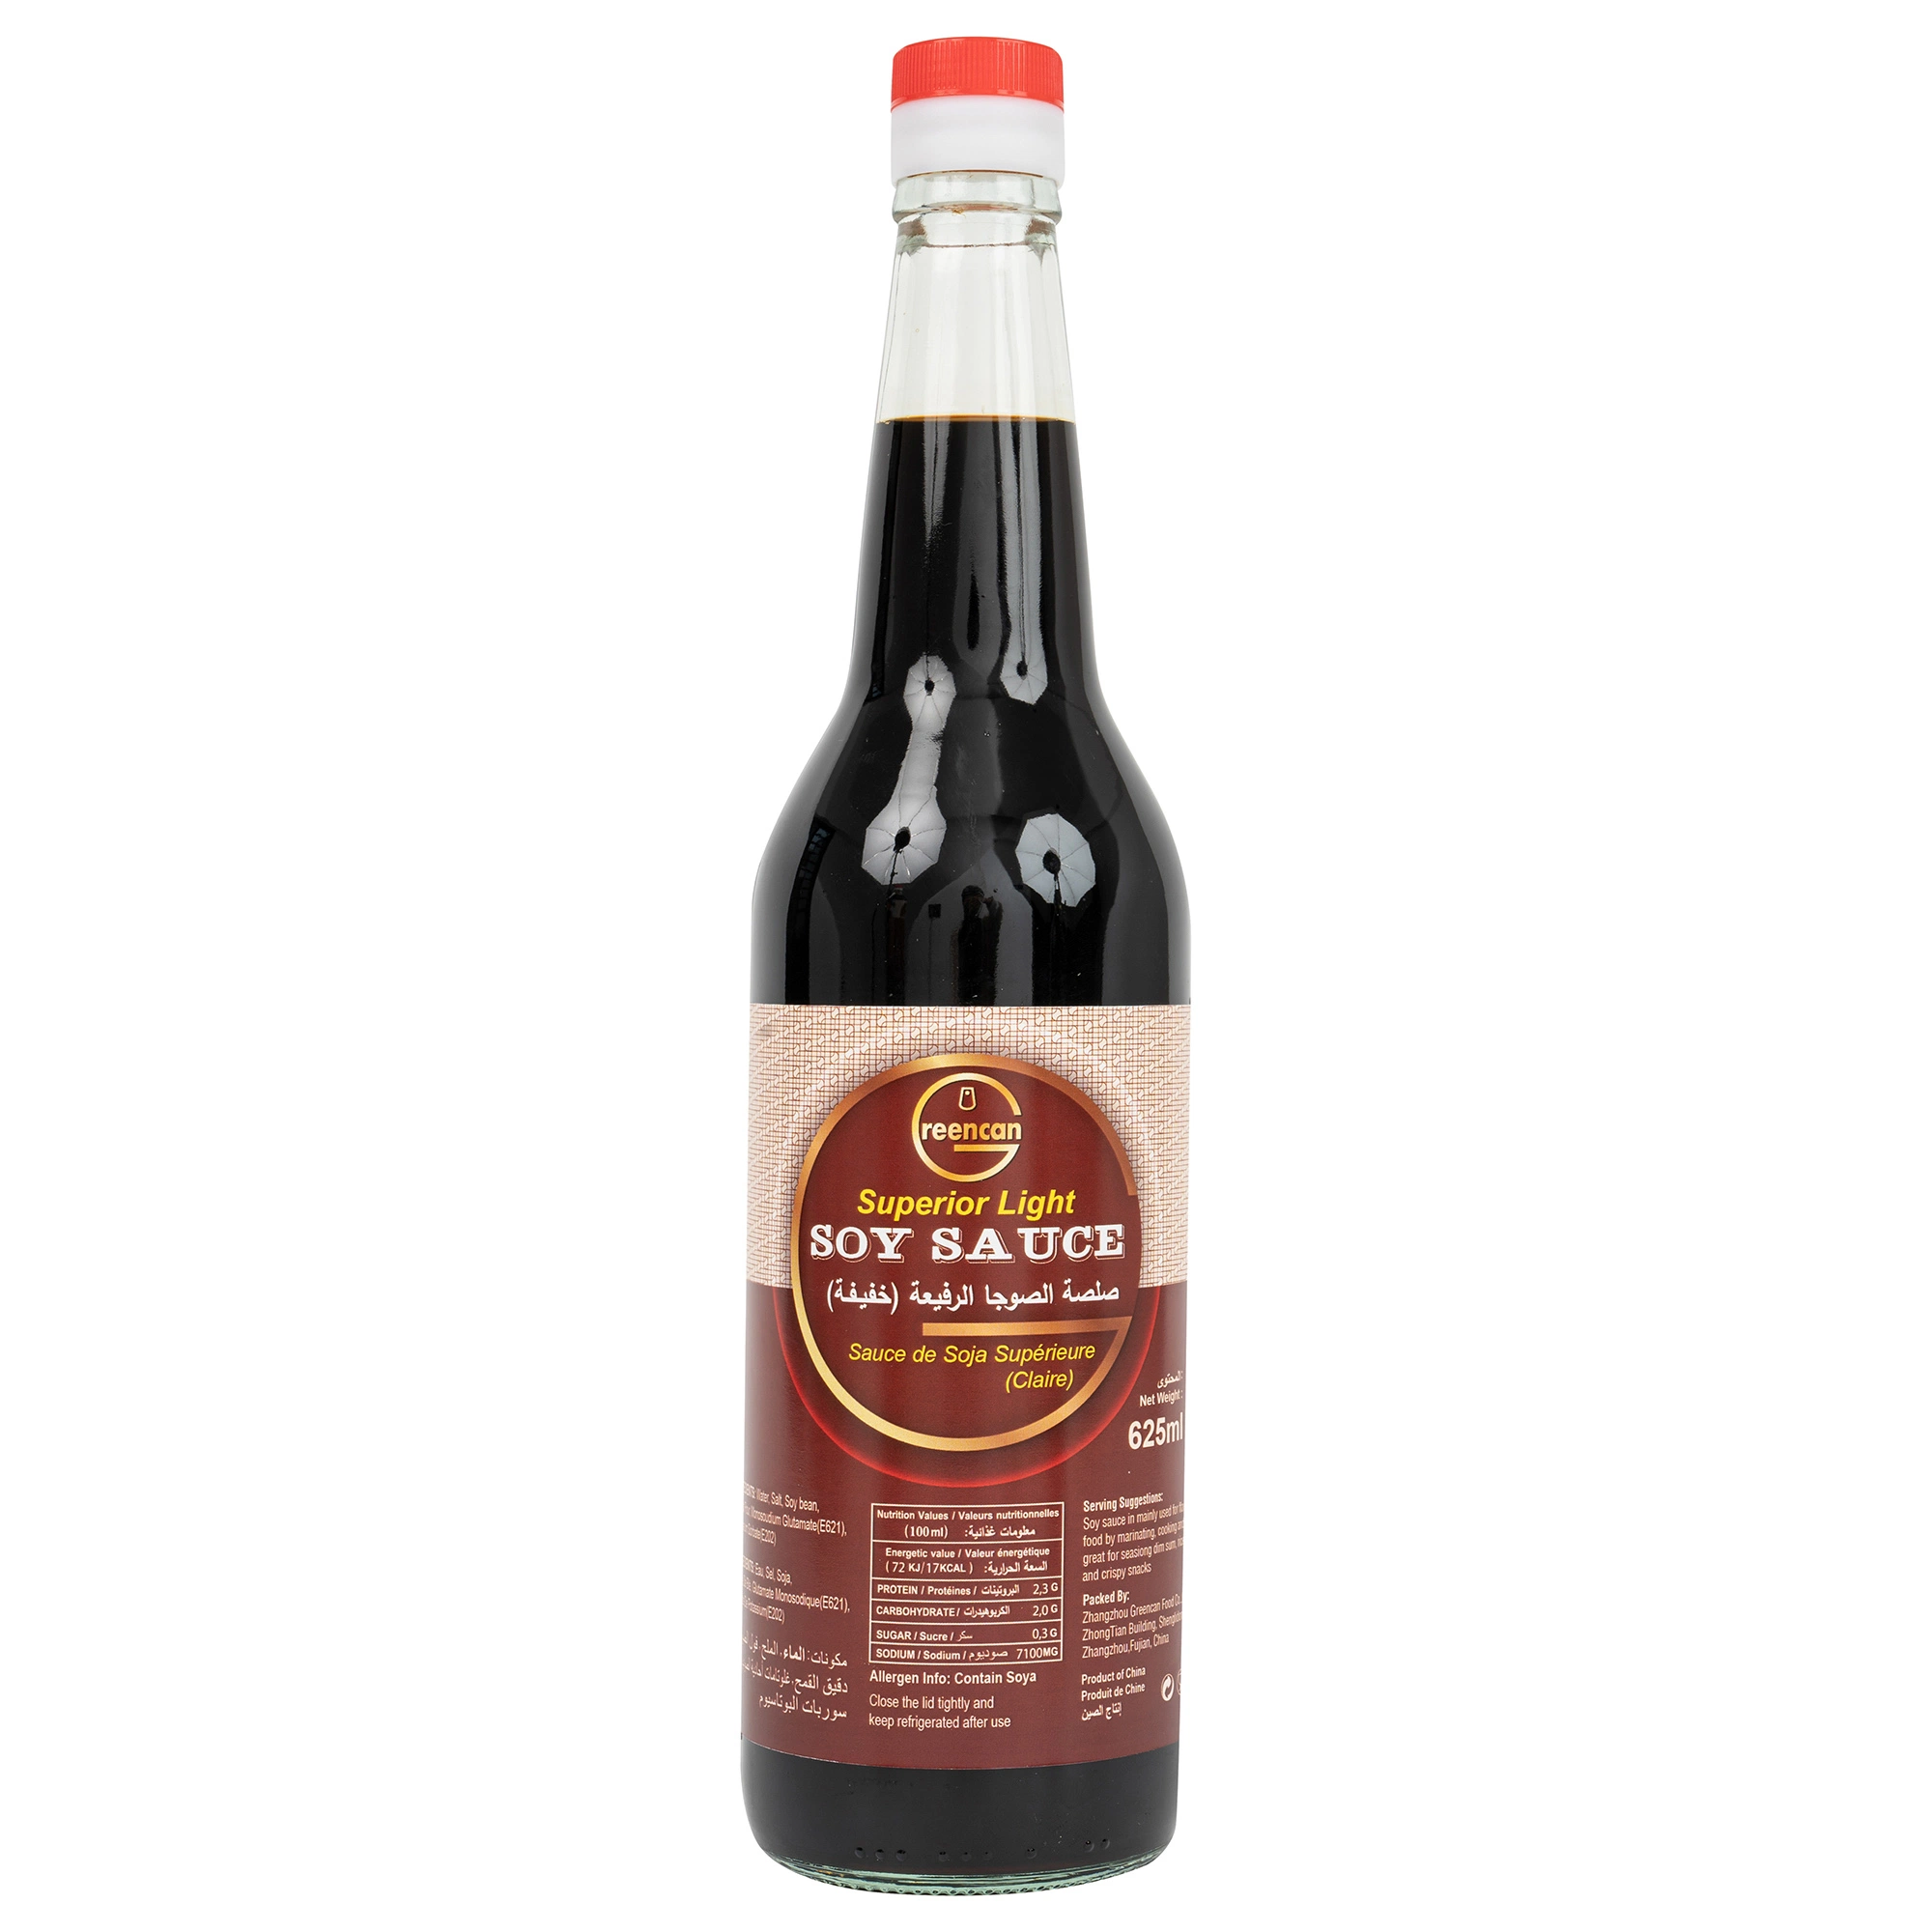 500mlnaturally Brewed Light Soy Sauce for Supermarket OEM with Factory Price